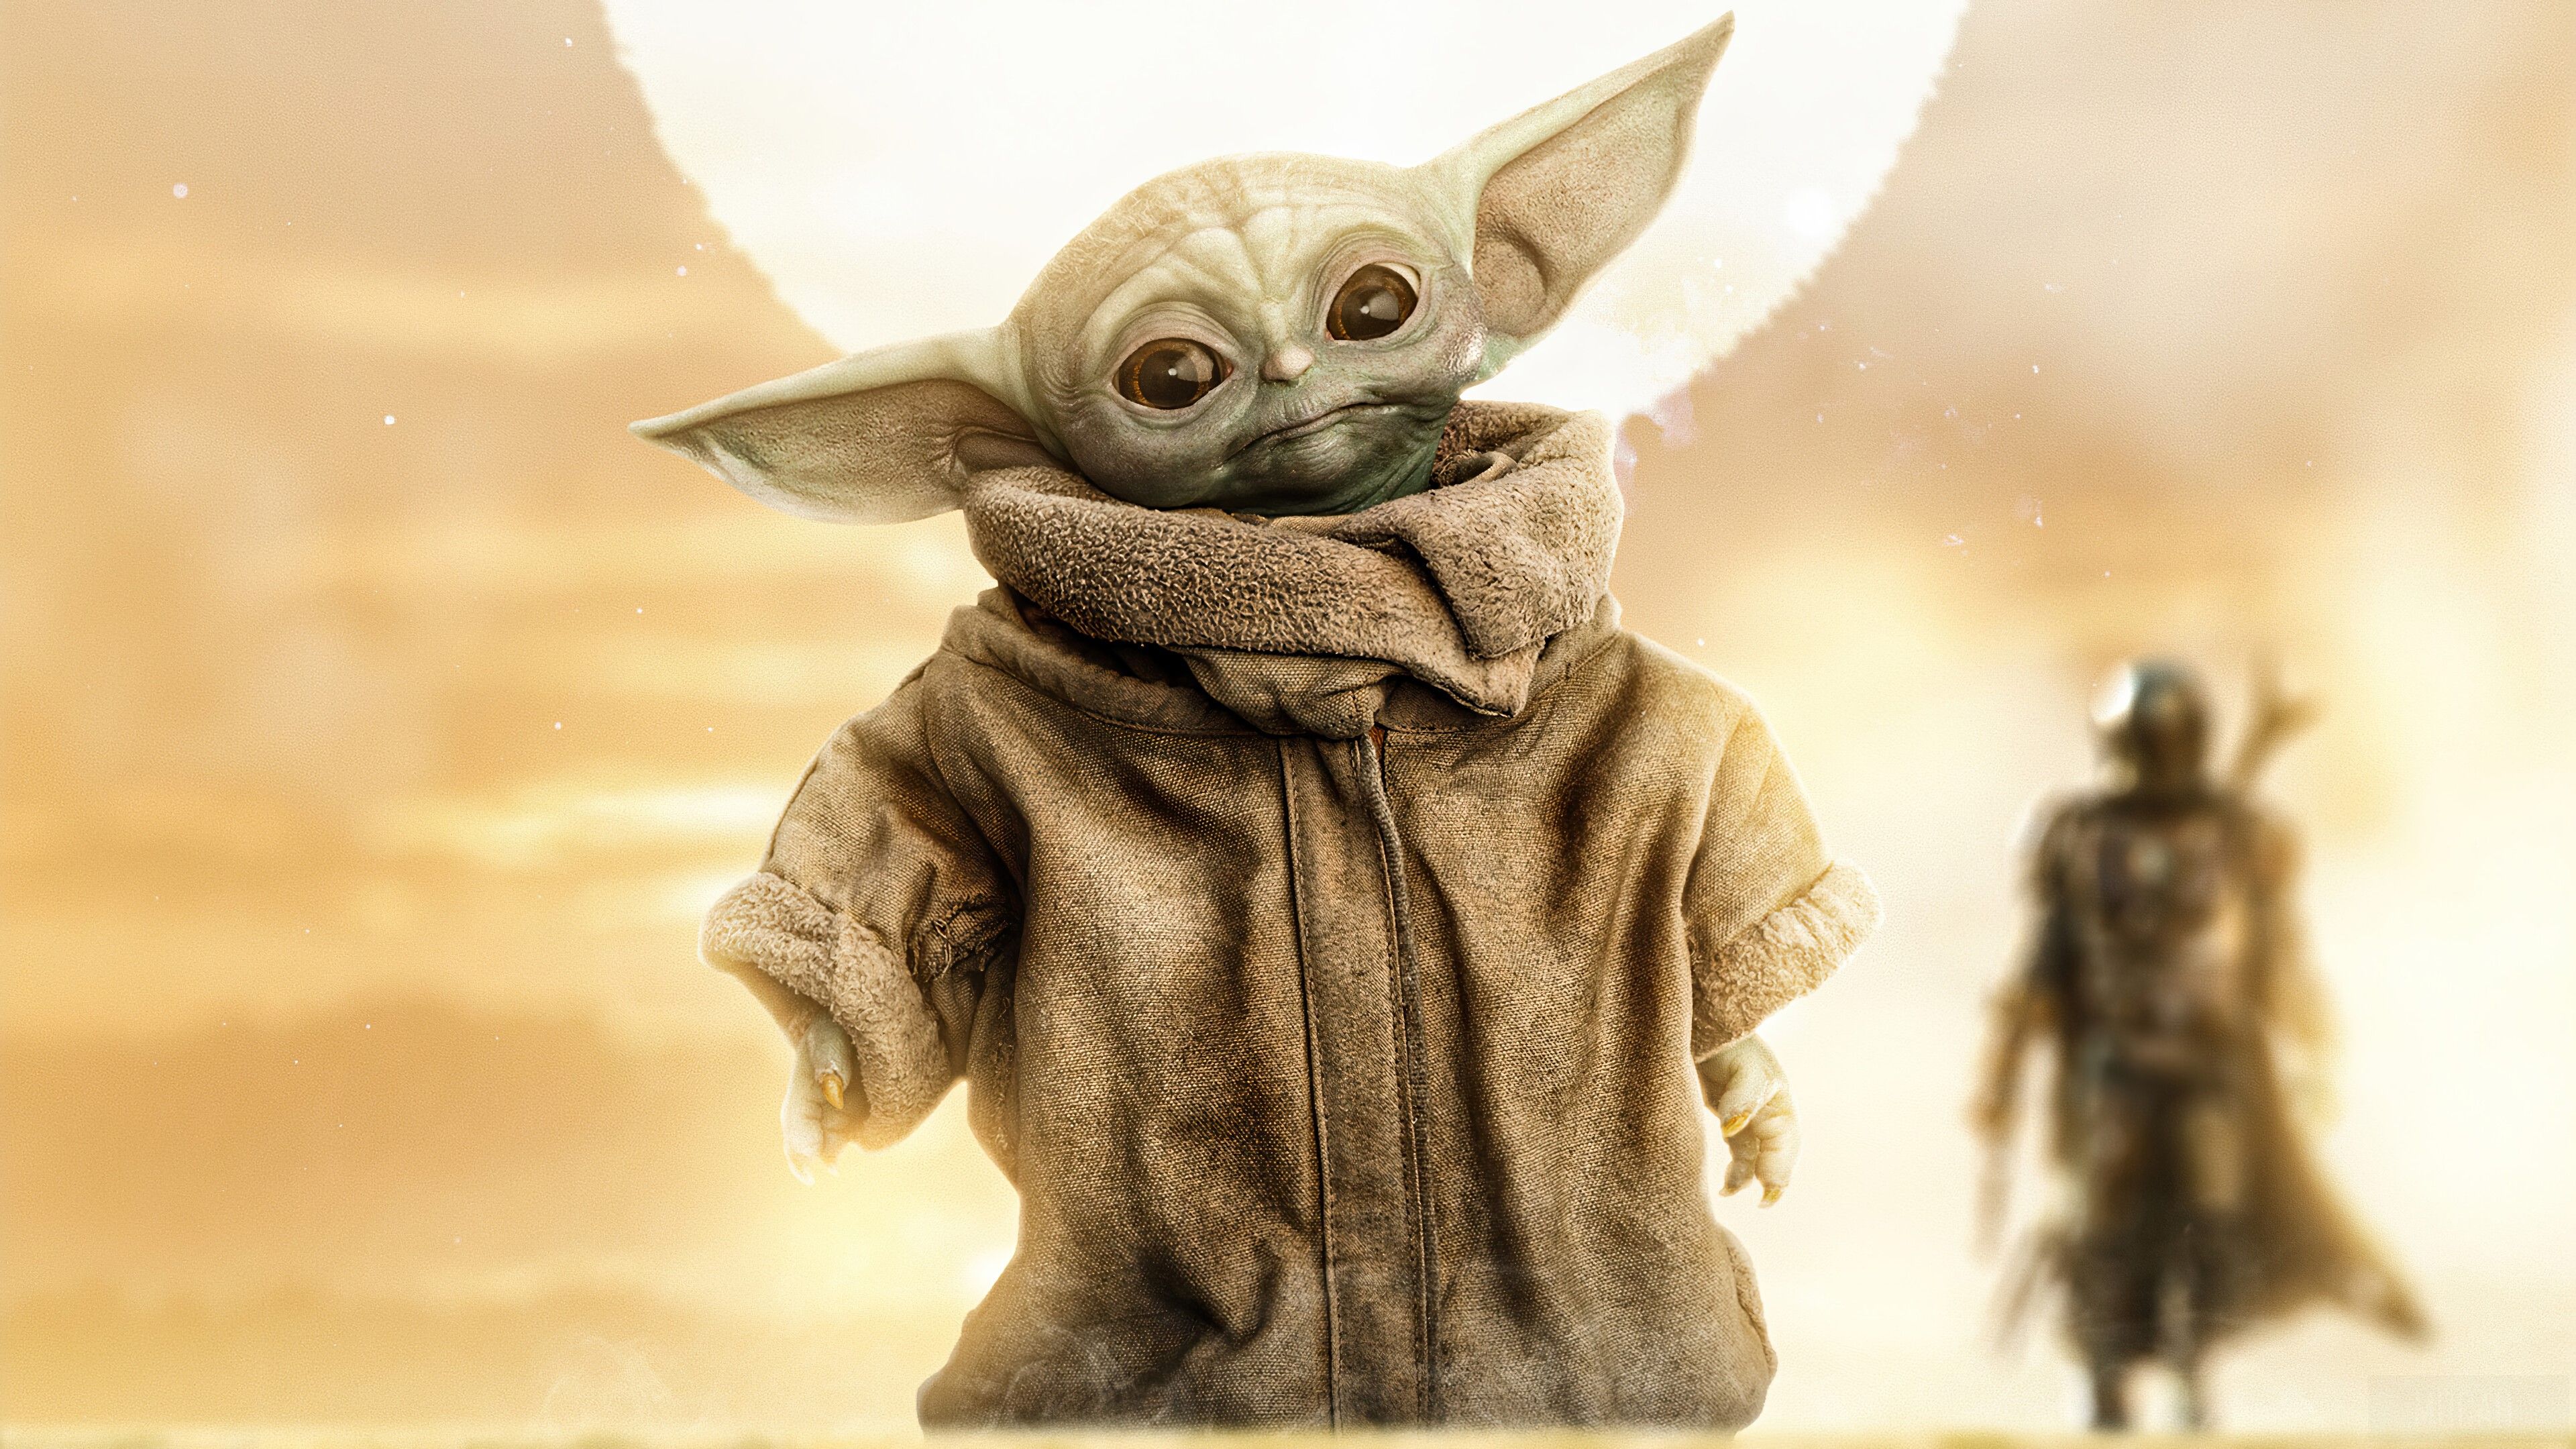 Baby Yoda 4K wallpapers for your desktop or mobile screen free and easy to download - Baby Yoda